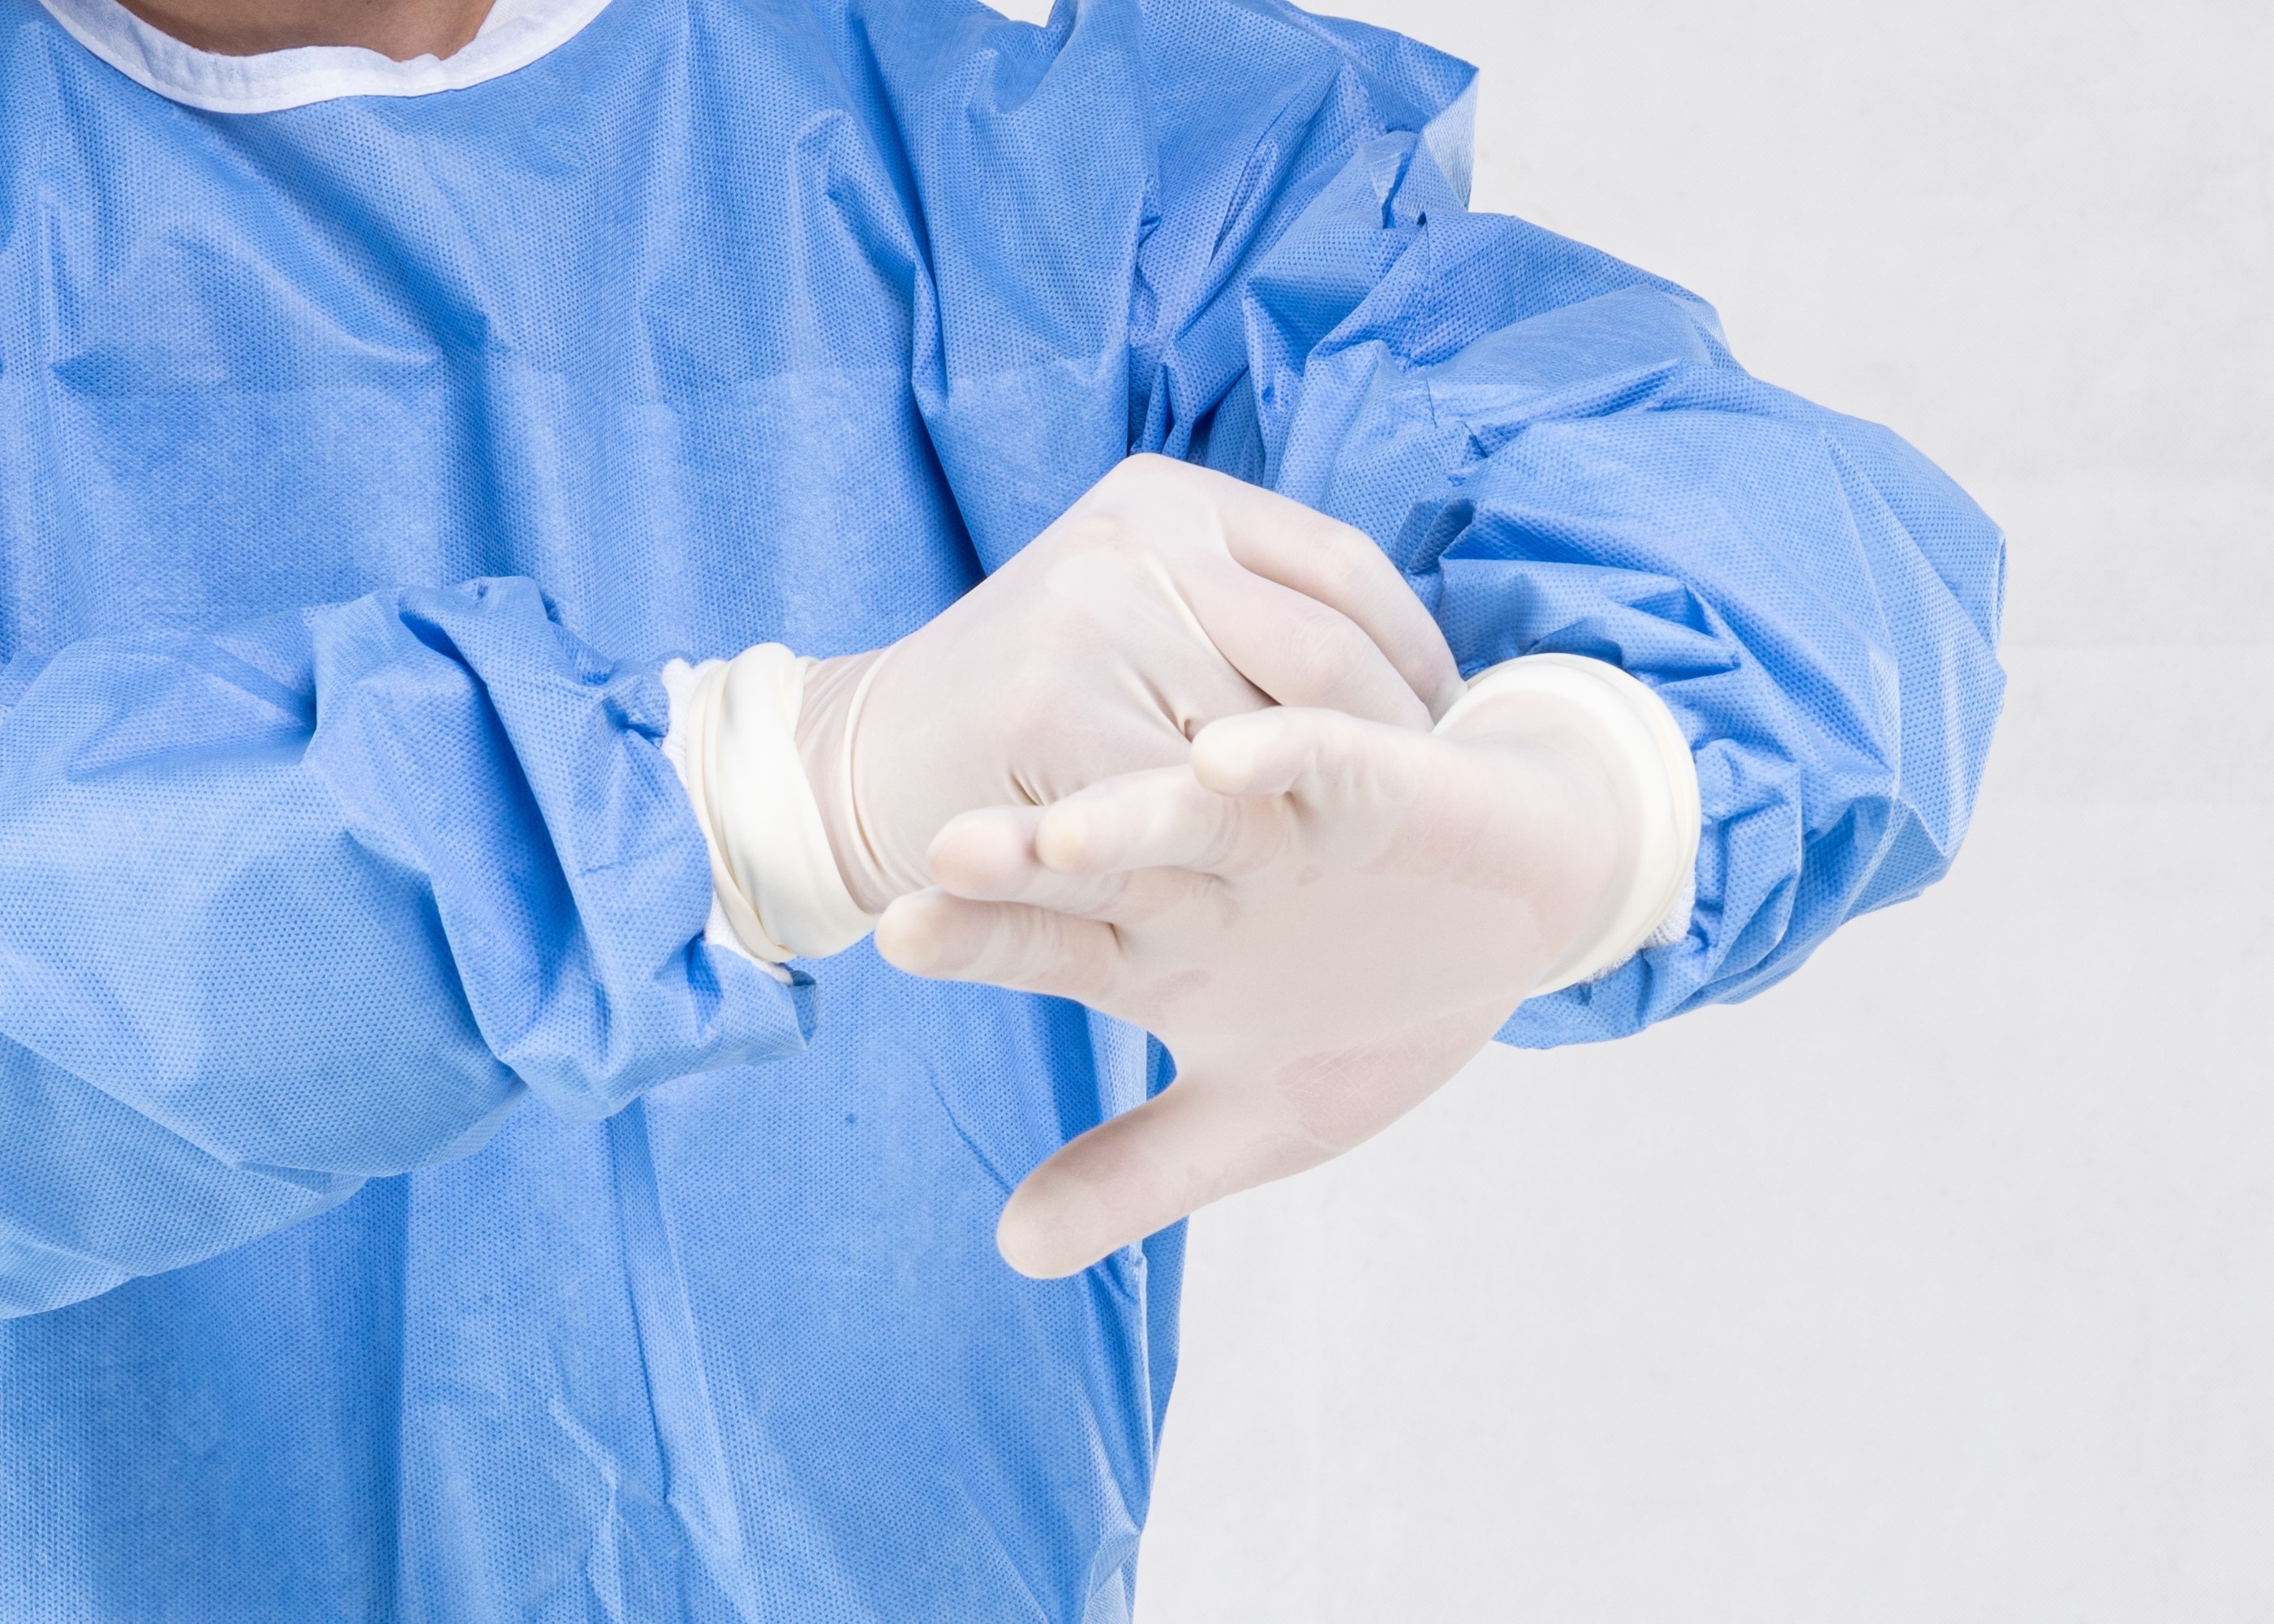  Surgical Disposable Hand Gloves Latex Rubber Gloves With Textured Or Smooth Manufactures